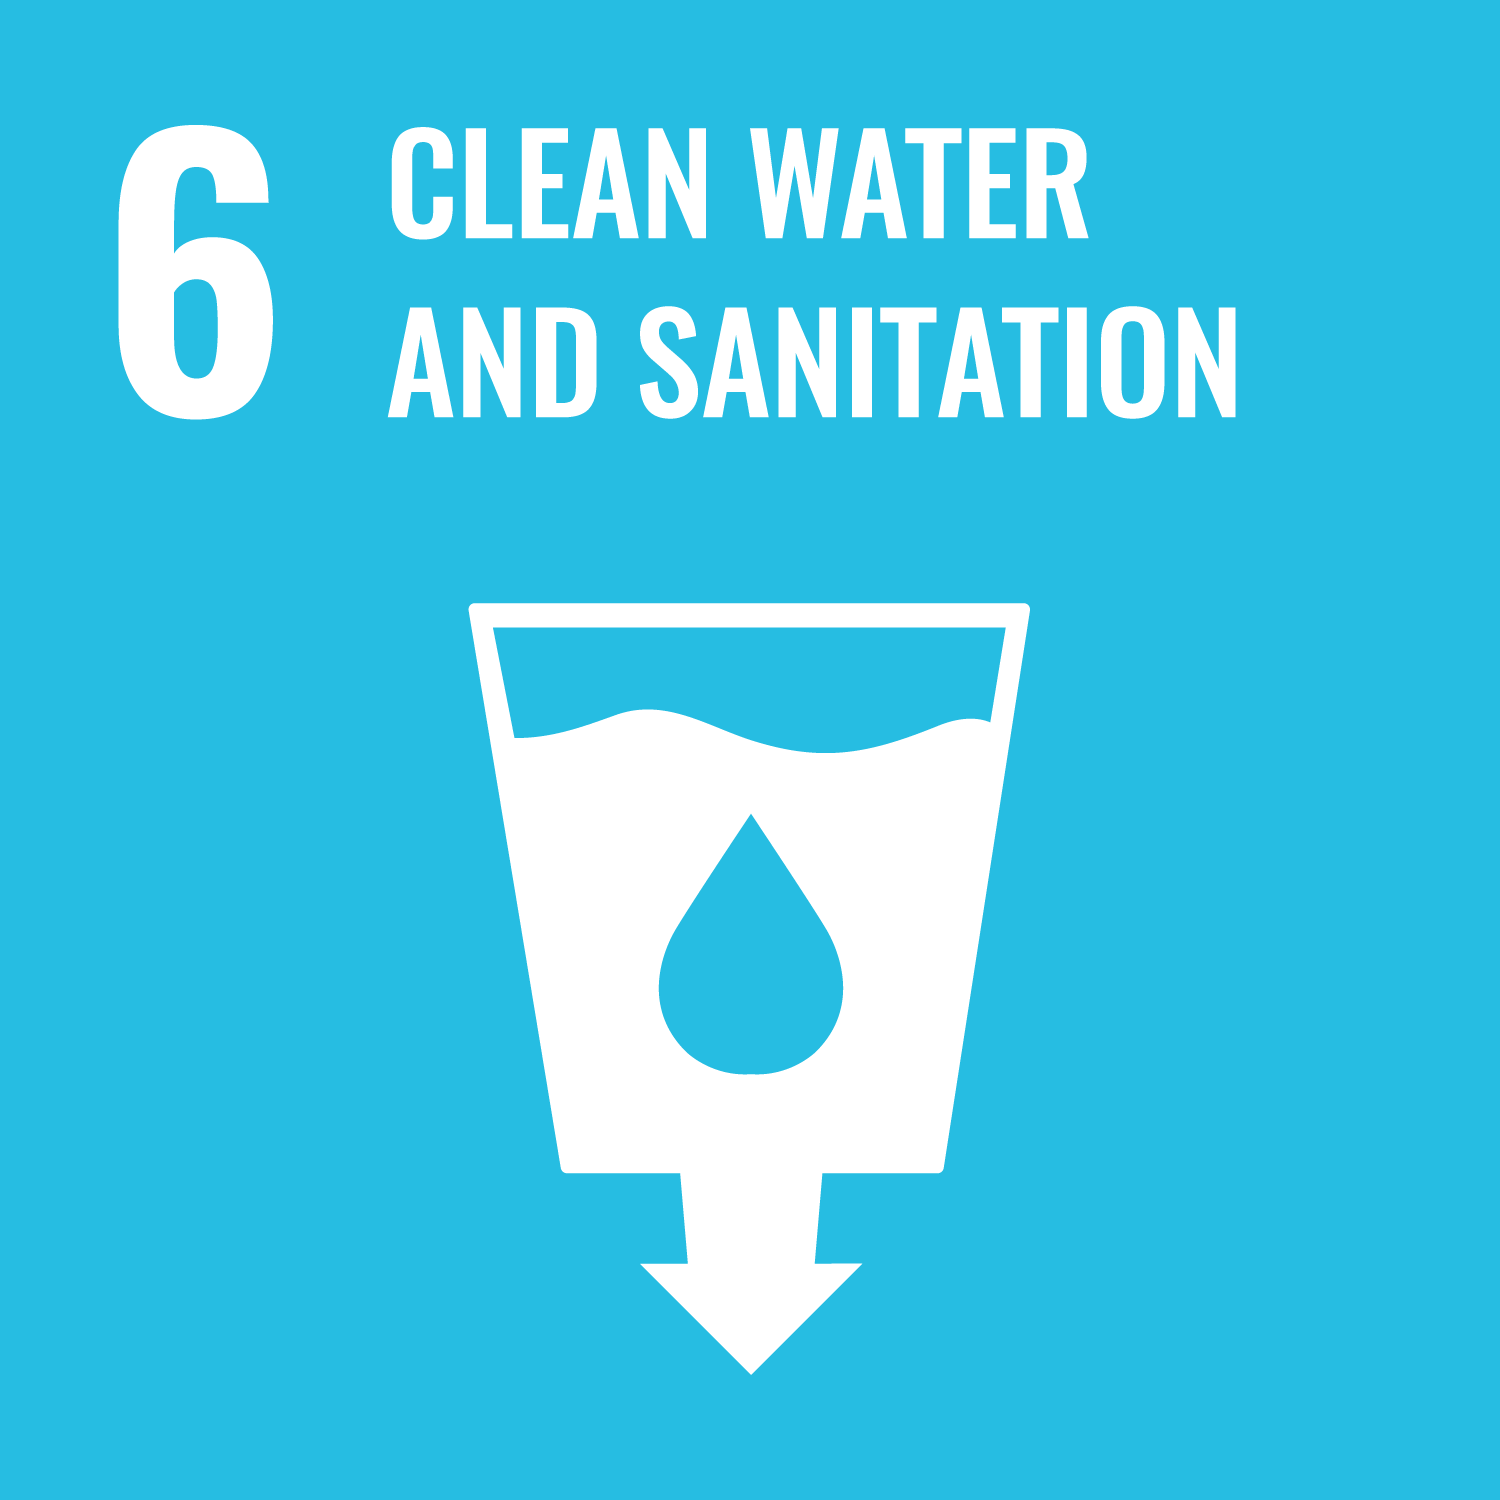 Logo of the Sustainable Development Goal 6: Clean Water and Sanitation